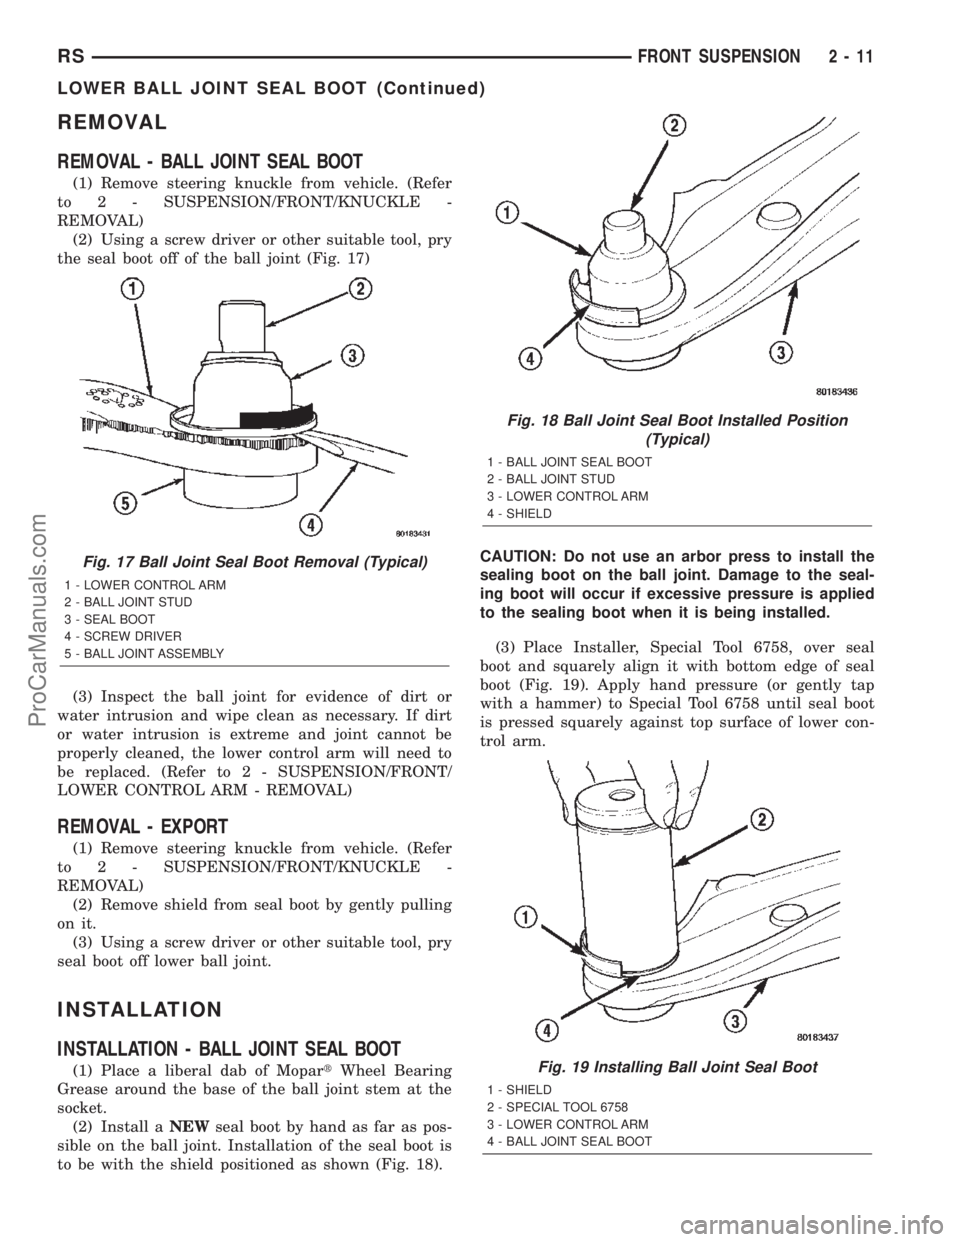 CHRYSLER TOWN AND COUNTRY 2002 Owners Guide REMOVAL
REMOVAL - BALL JOINT SEAL BOOT
(1) Remove steering knuckle from vehicle. (Refer
to 2 - SUSPENSION/FRONT/KNUCKLE -
REMOVAL)
(2) Using a screw driver or other suitable tool, pry
the seal boot of